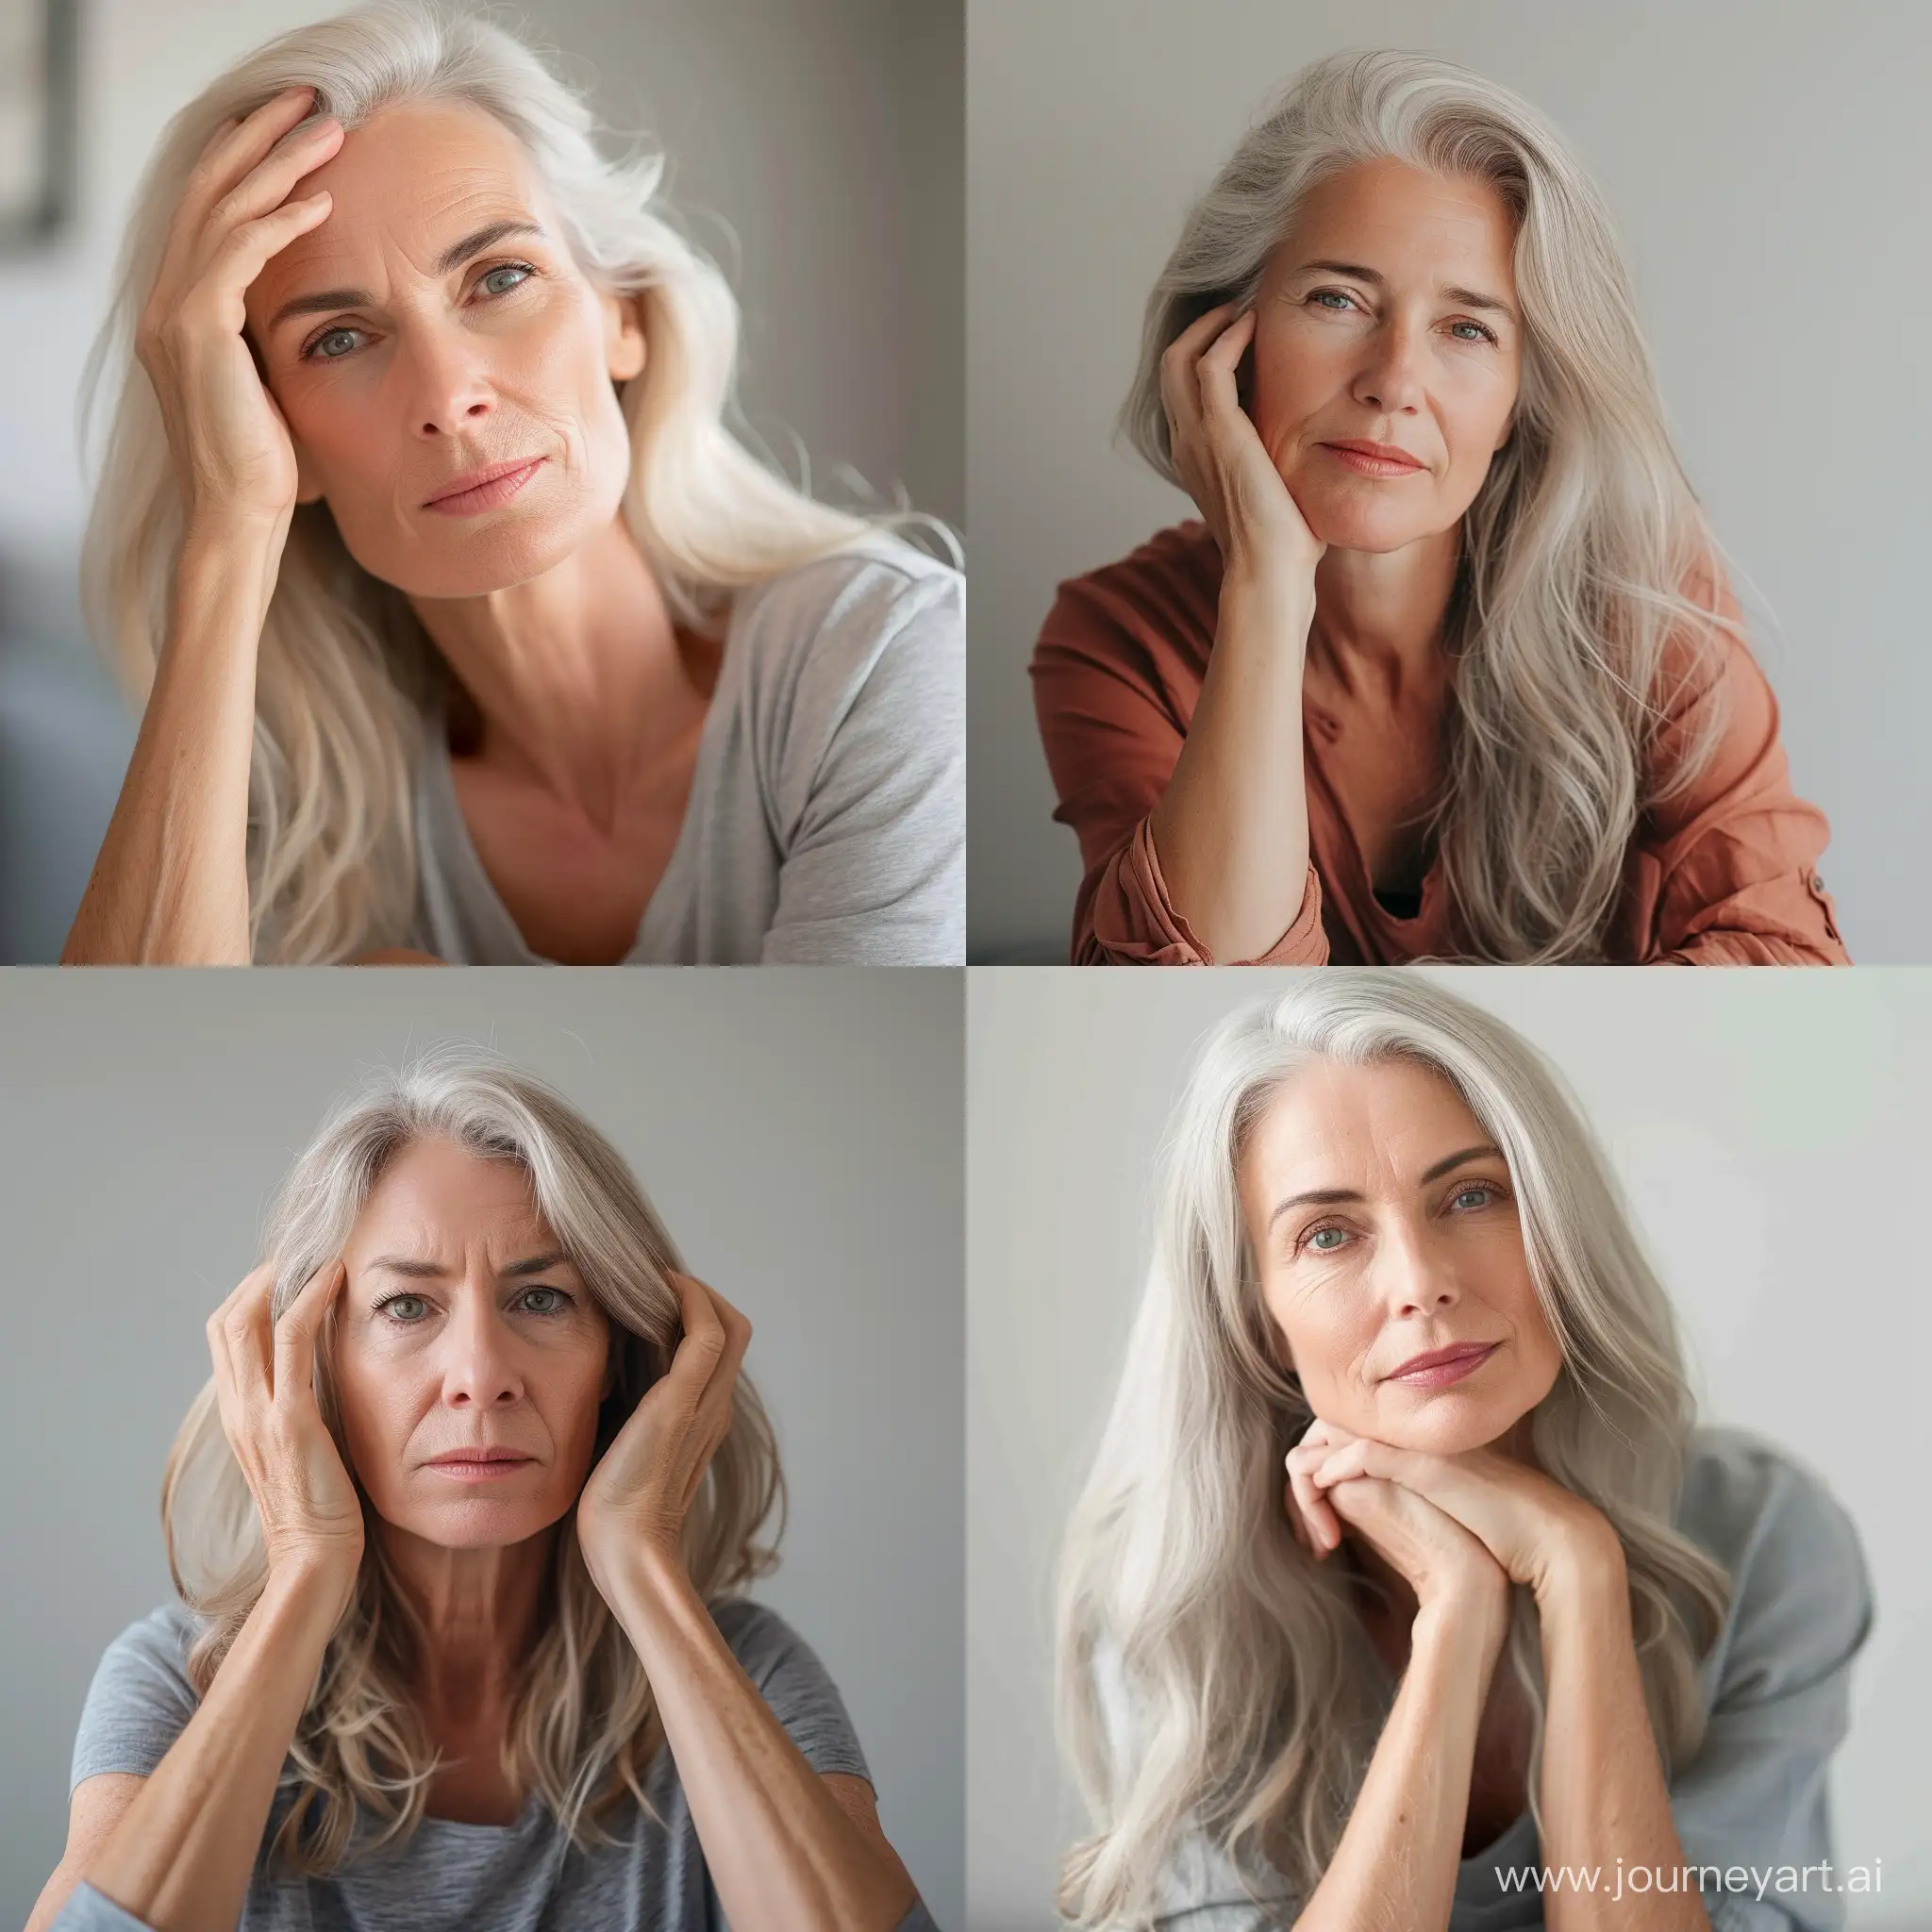 Menopausal-Woman-Coping-with-Symptoms-Artistic-Depiction